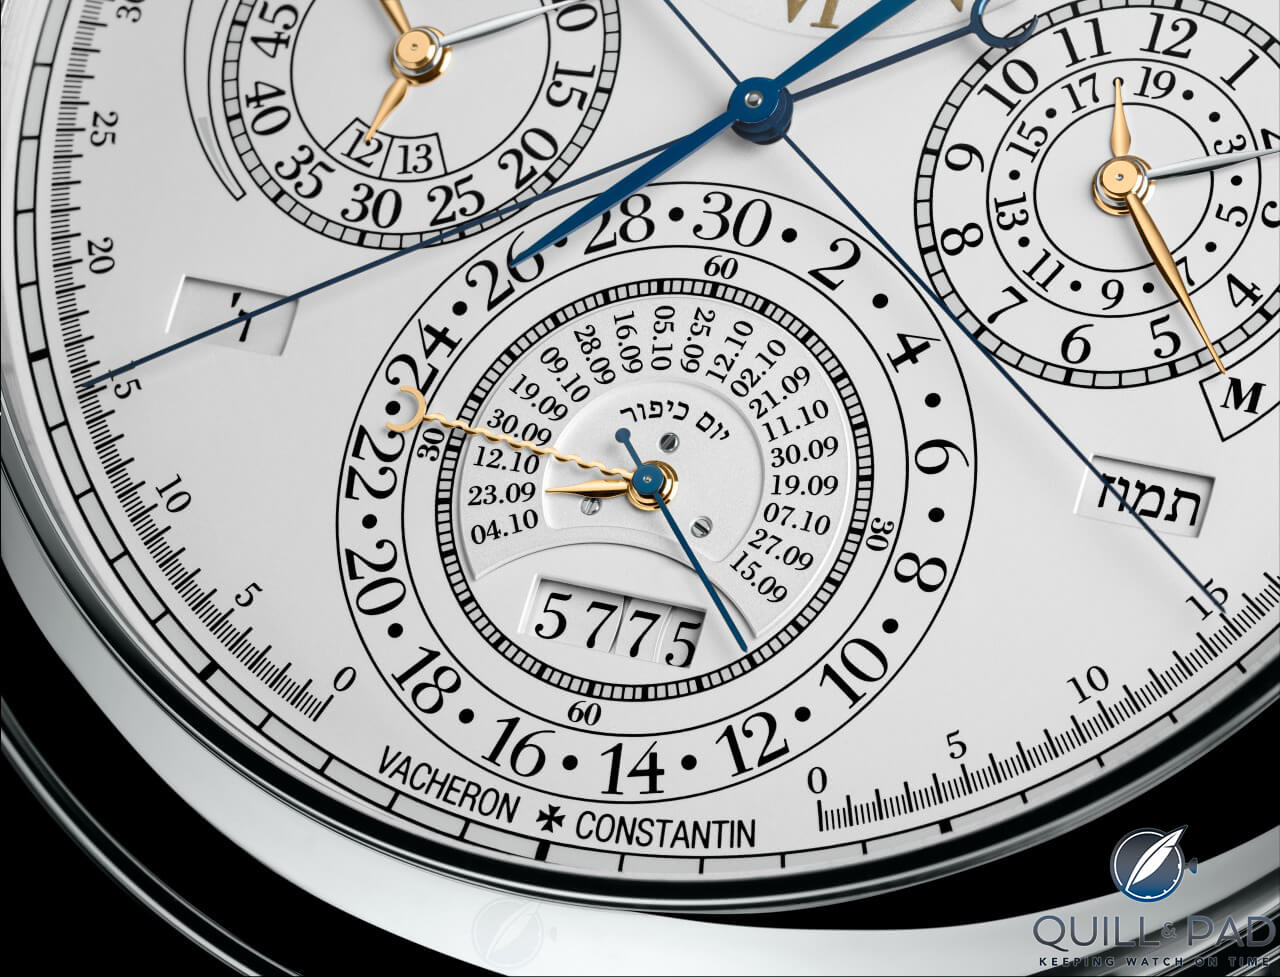 This close-up view of the front dial of Vacheron Constantin Reference 57260 provides a view of the Hebrew calendar including displays of the century, the decade, and Yom Kippur